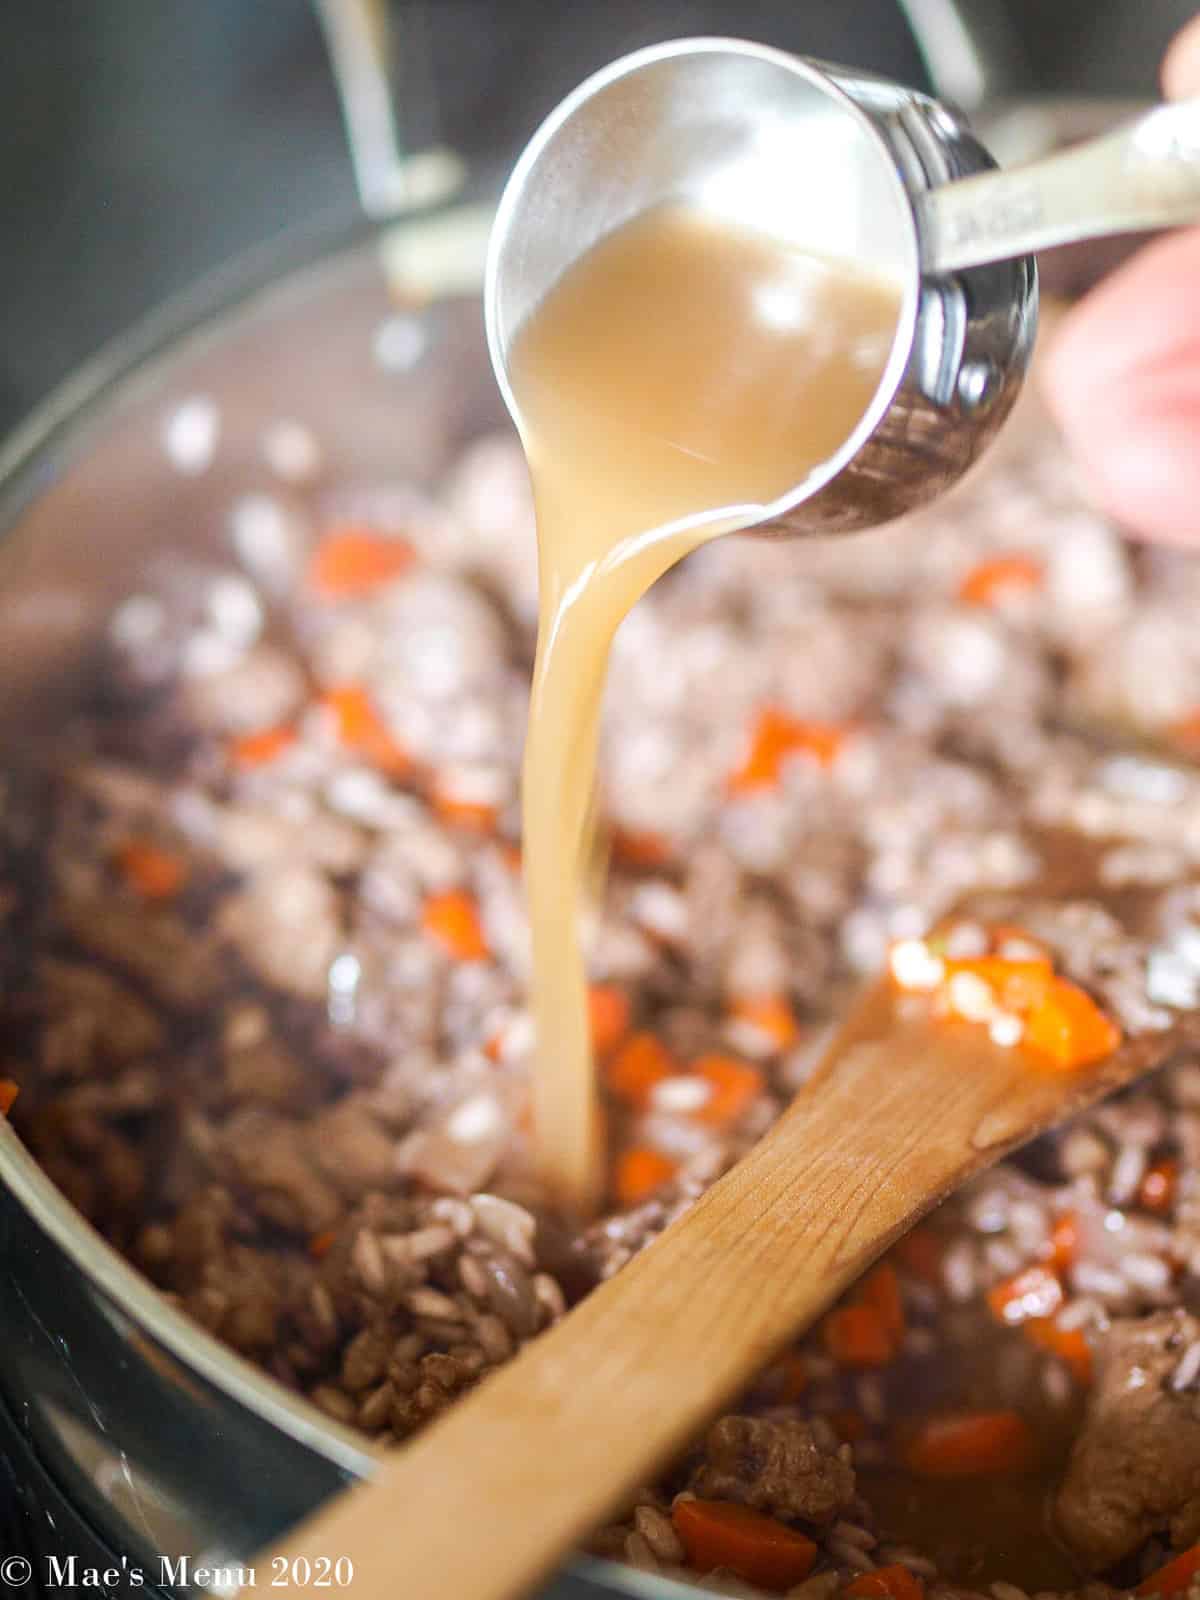 Pouring a ladle of broth into the rice